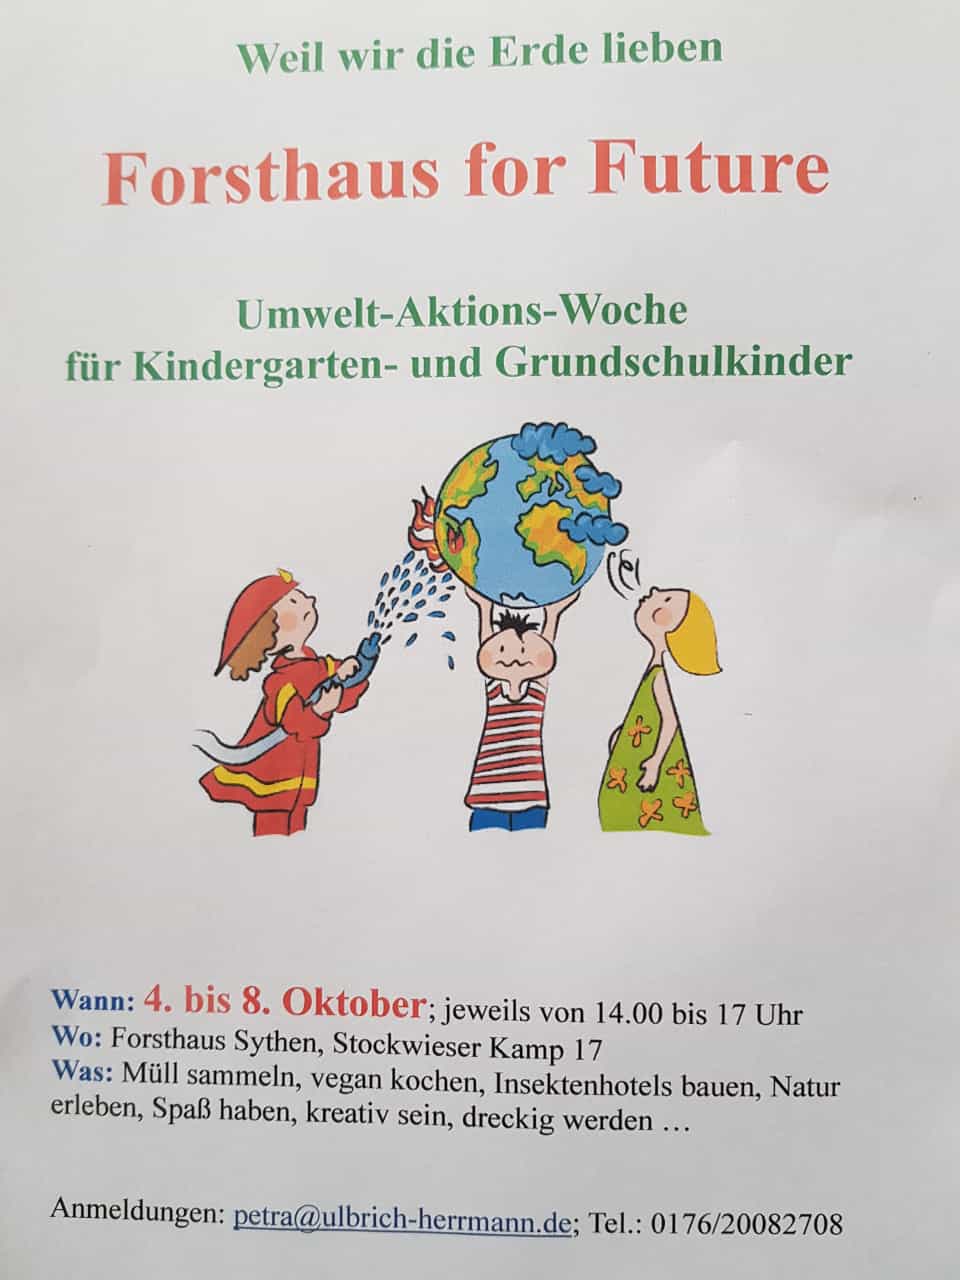 Forsthaus for Future